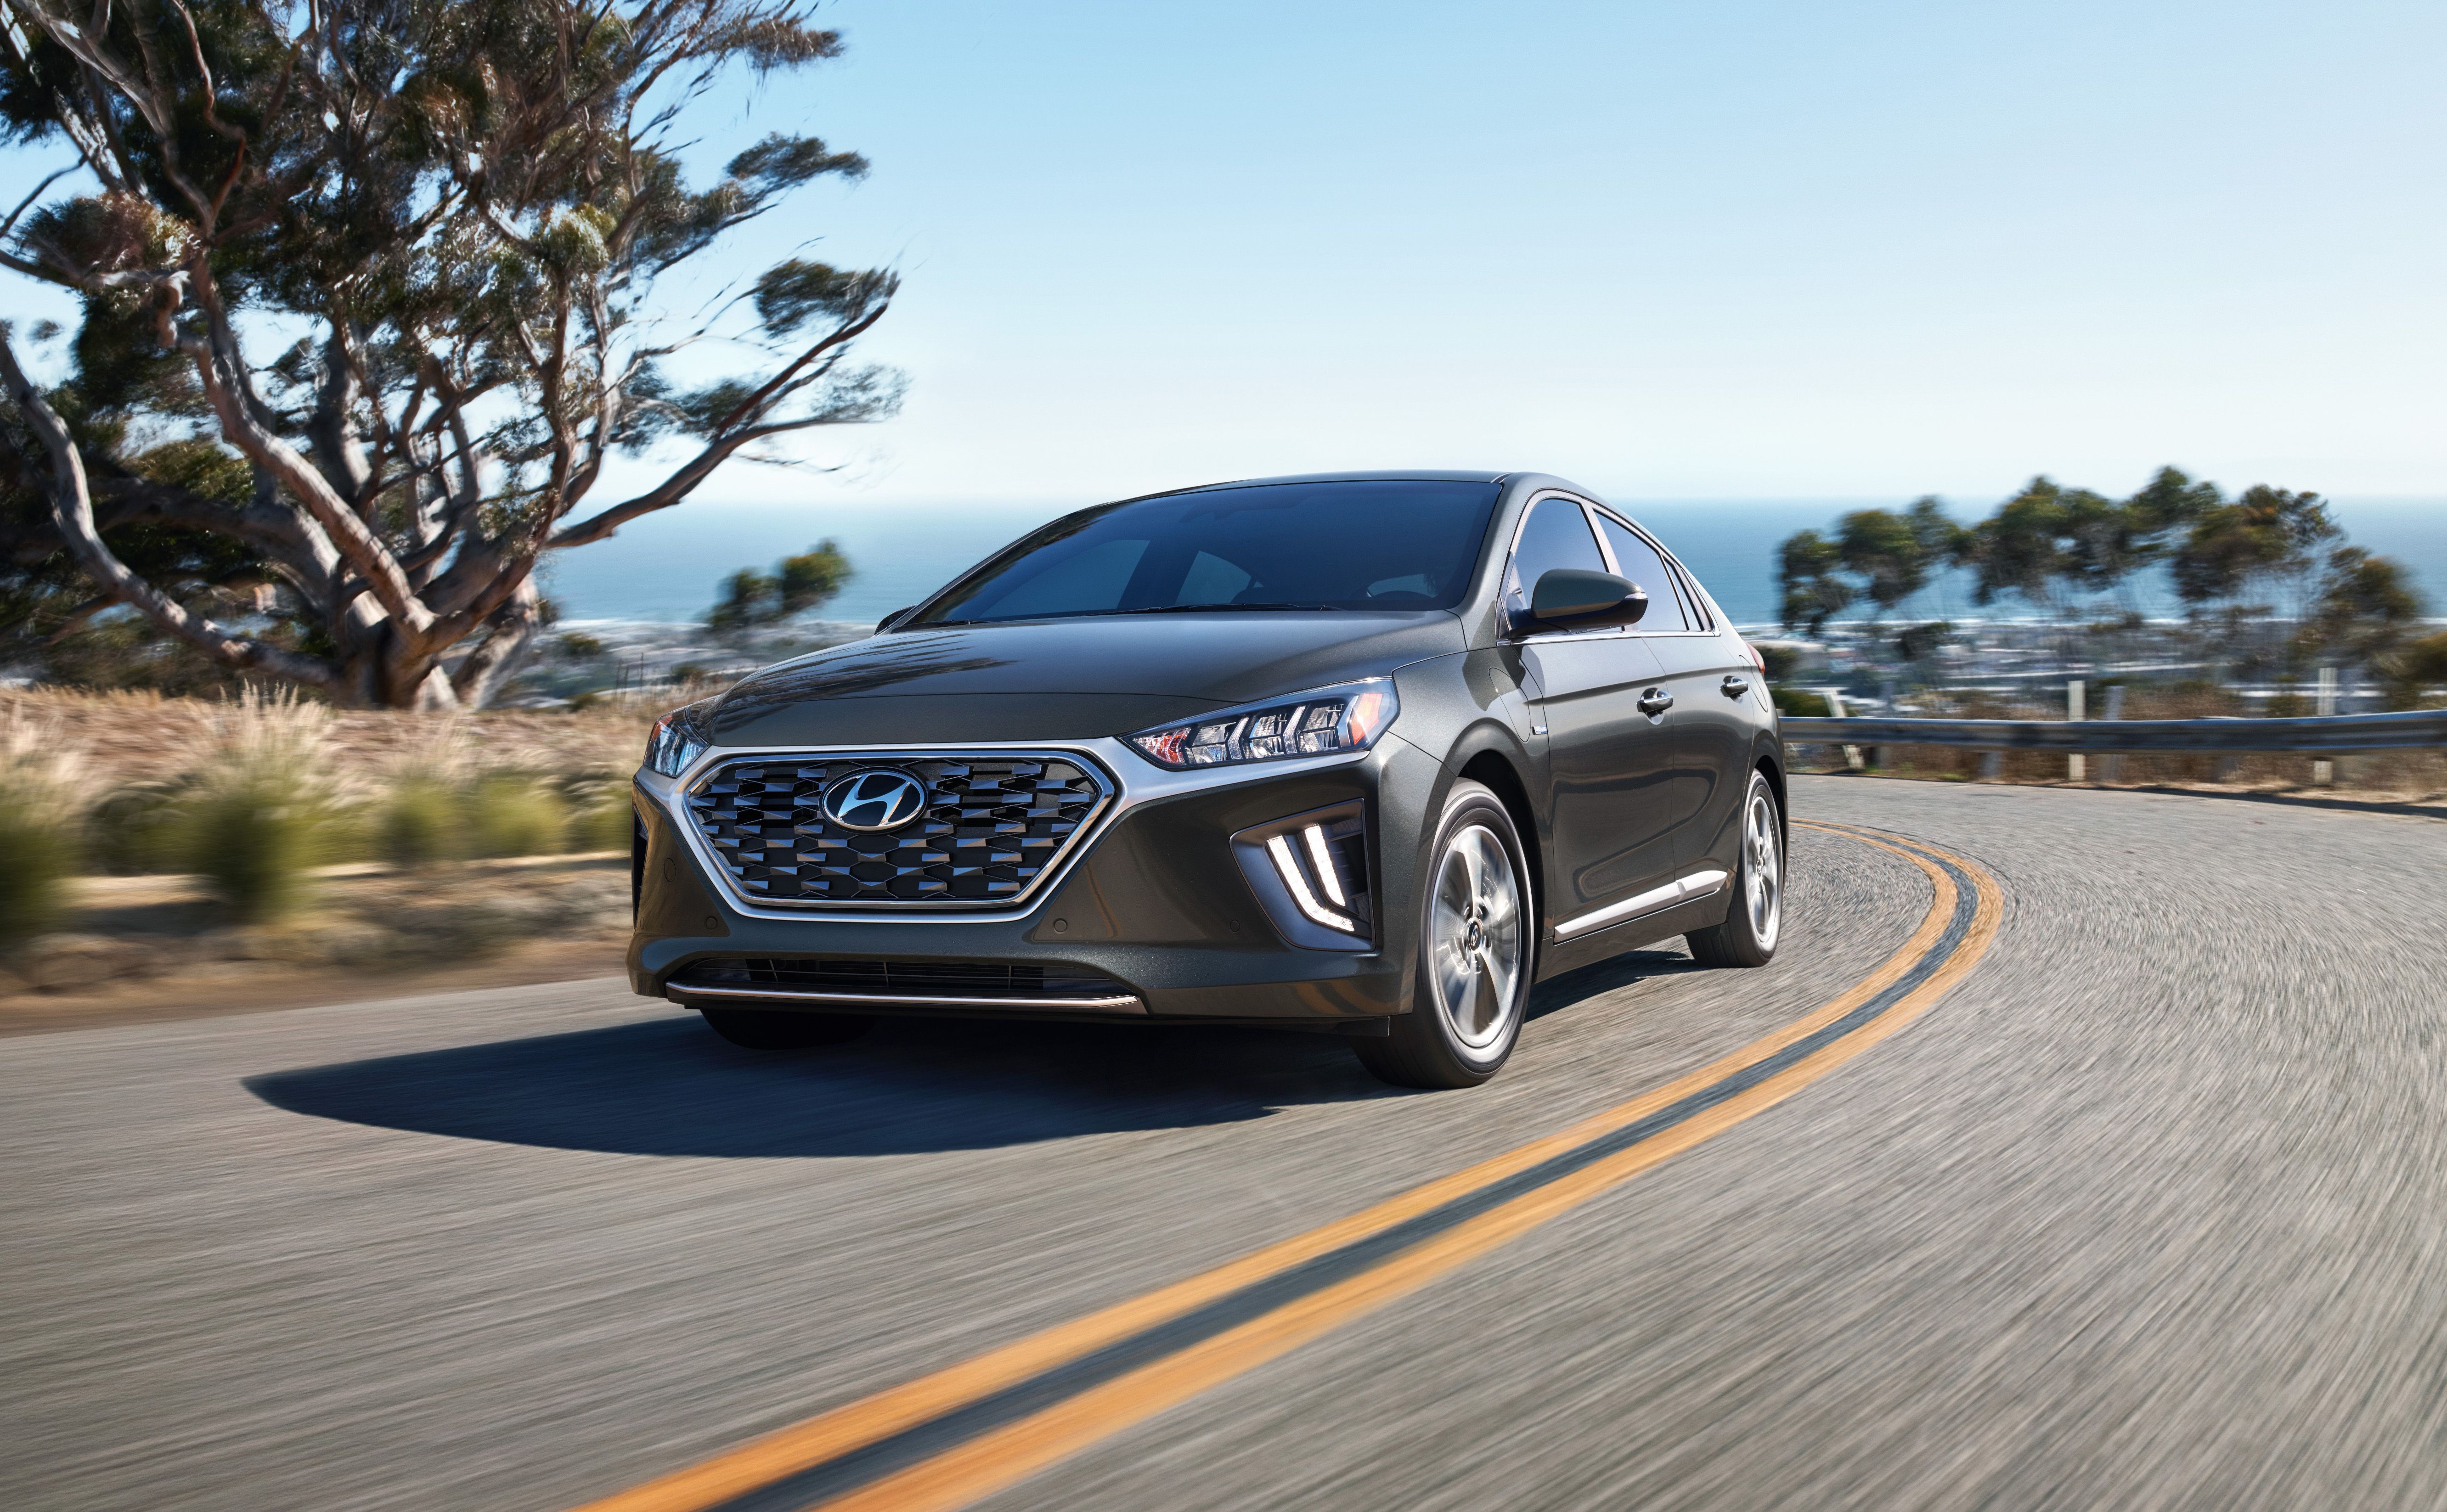 Extreme armoede daarna Zeg opzij 2022 Hyundai Ioniq Review, Pricing, and Specs